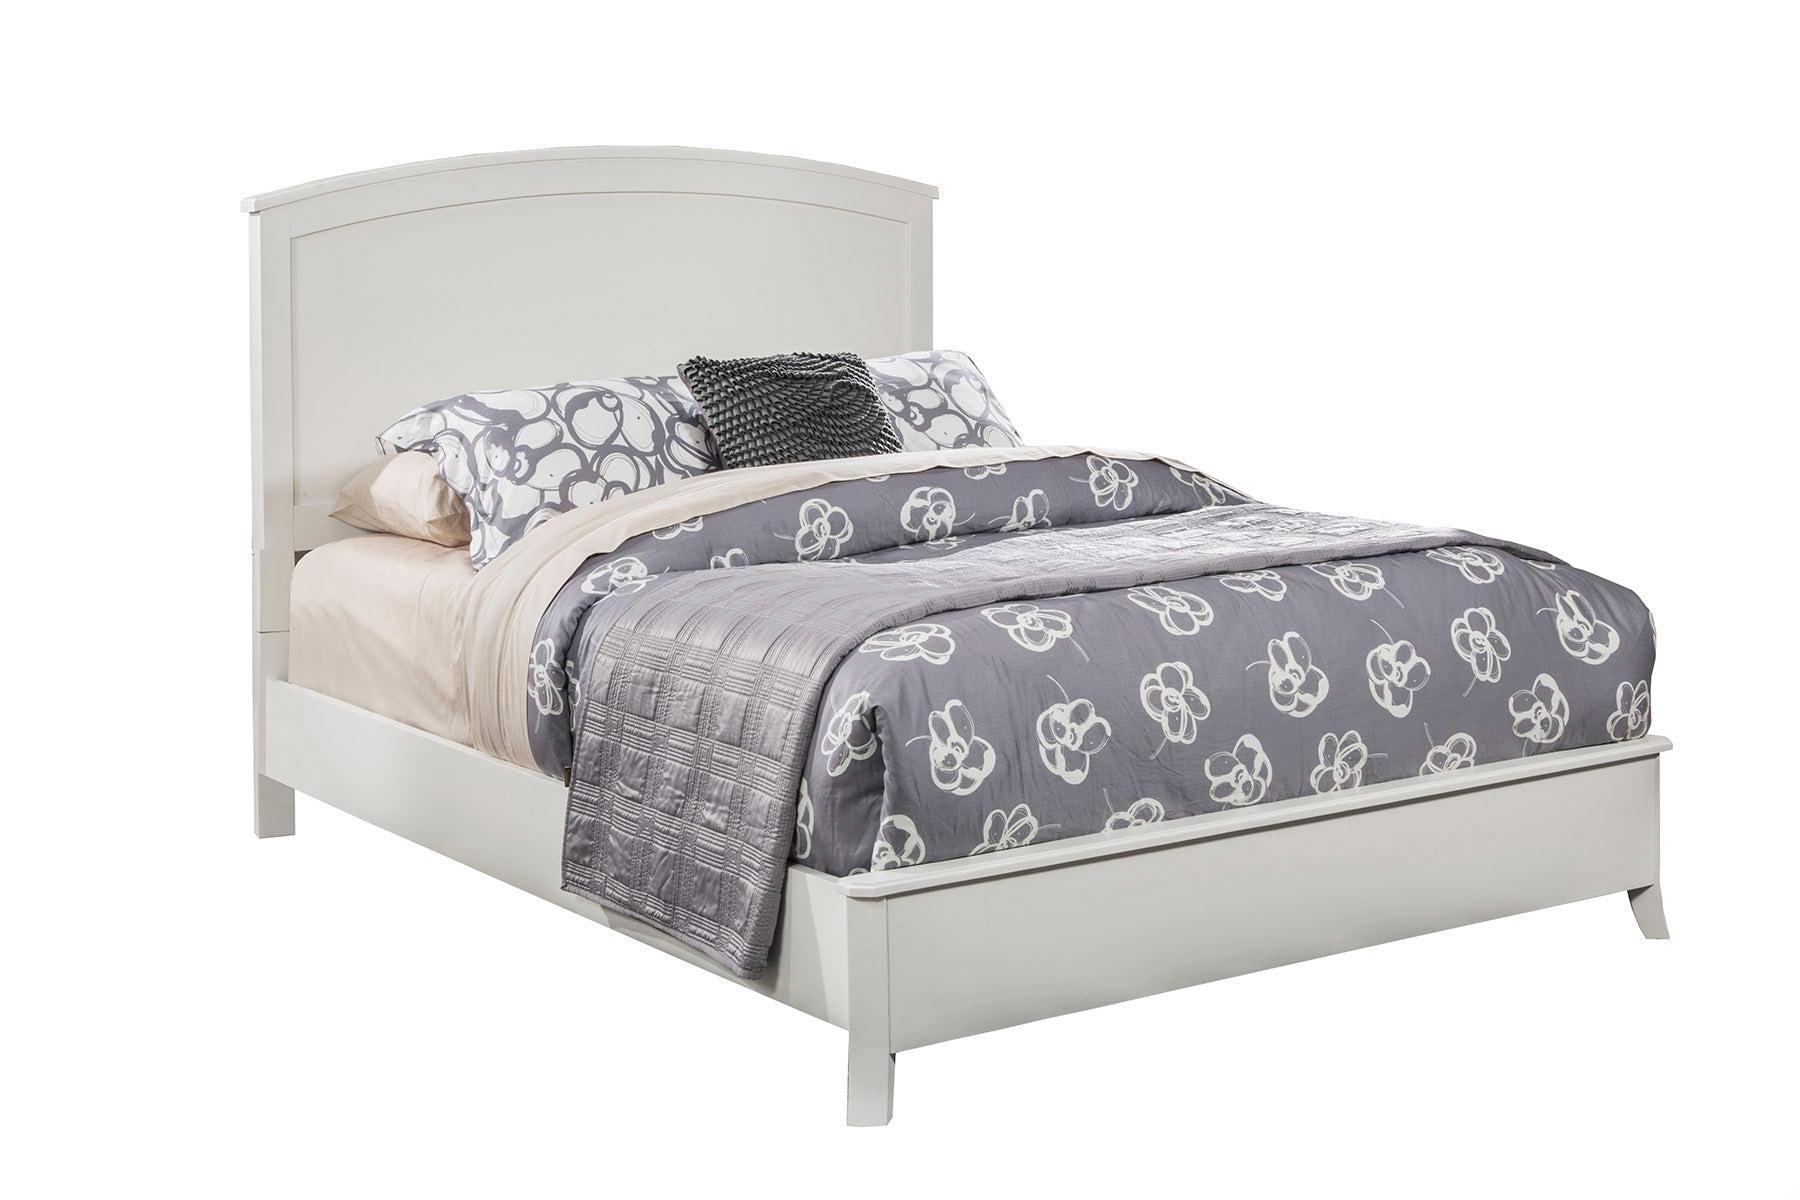 Classic, Traditional Panel Bed BAKER 977-W-07CK in White 